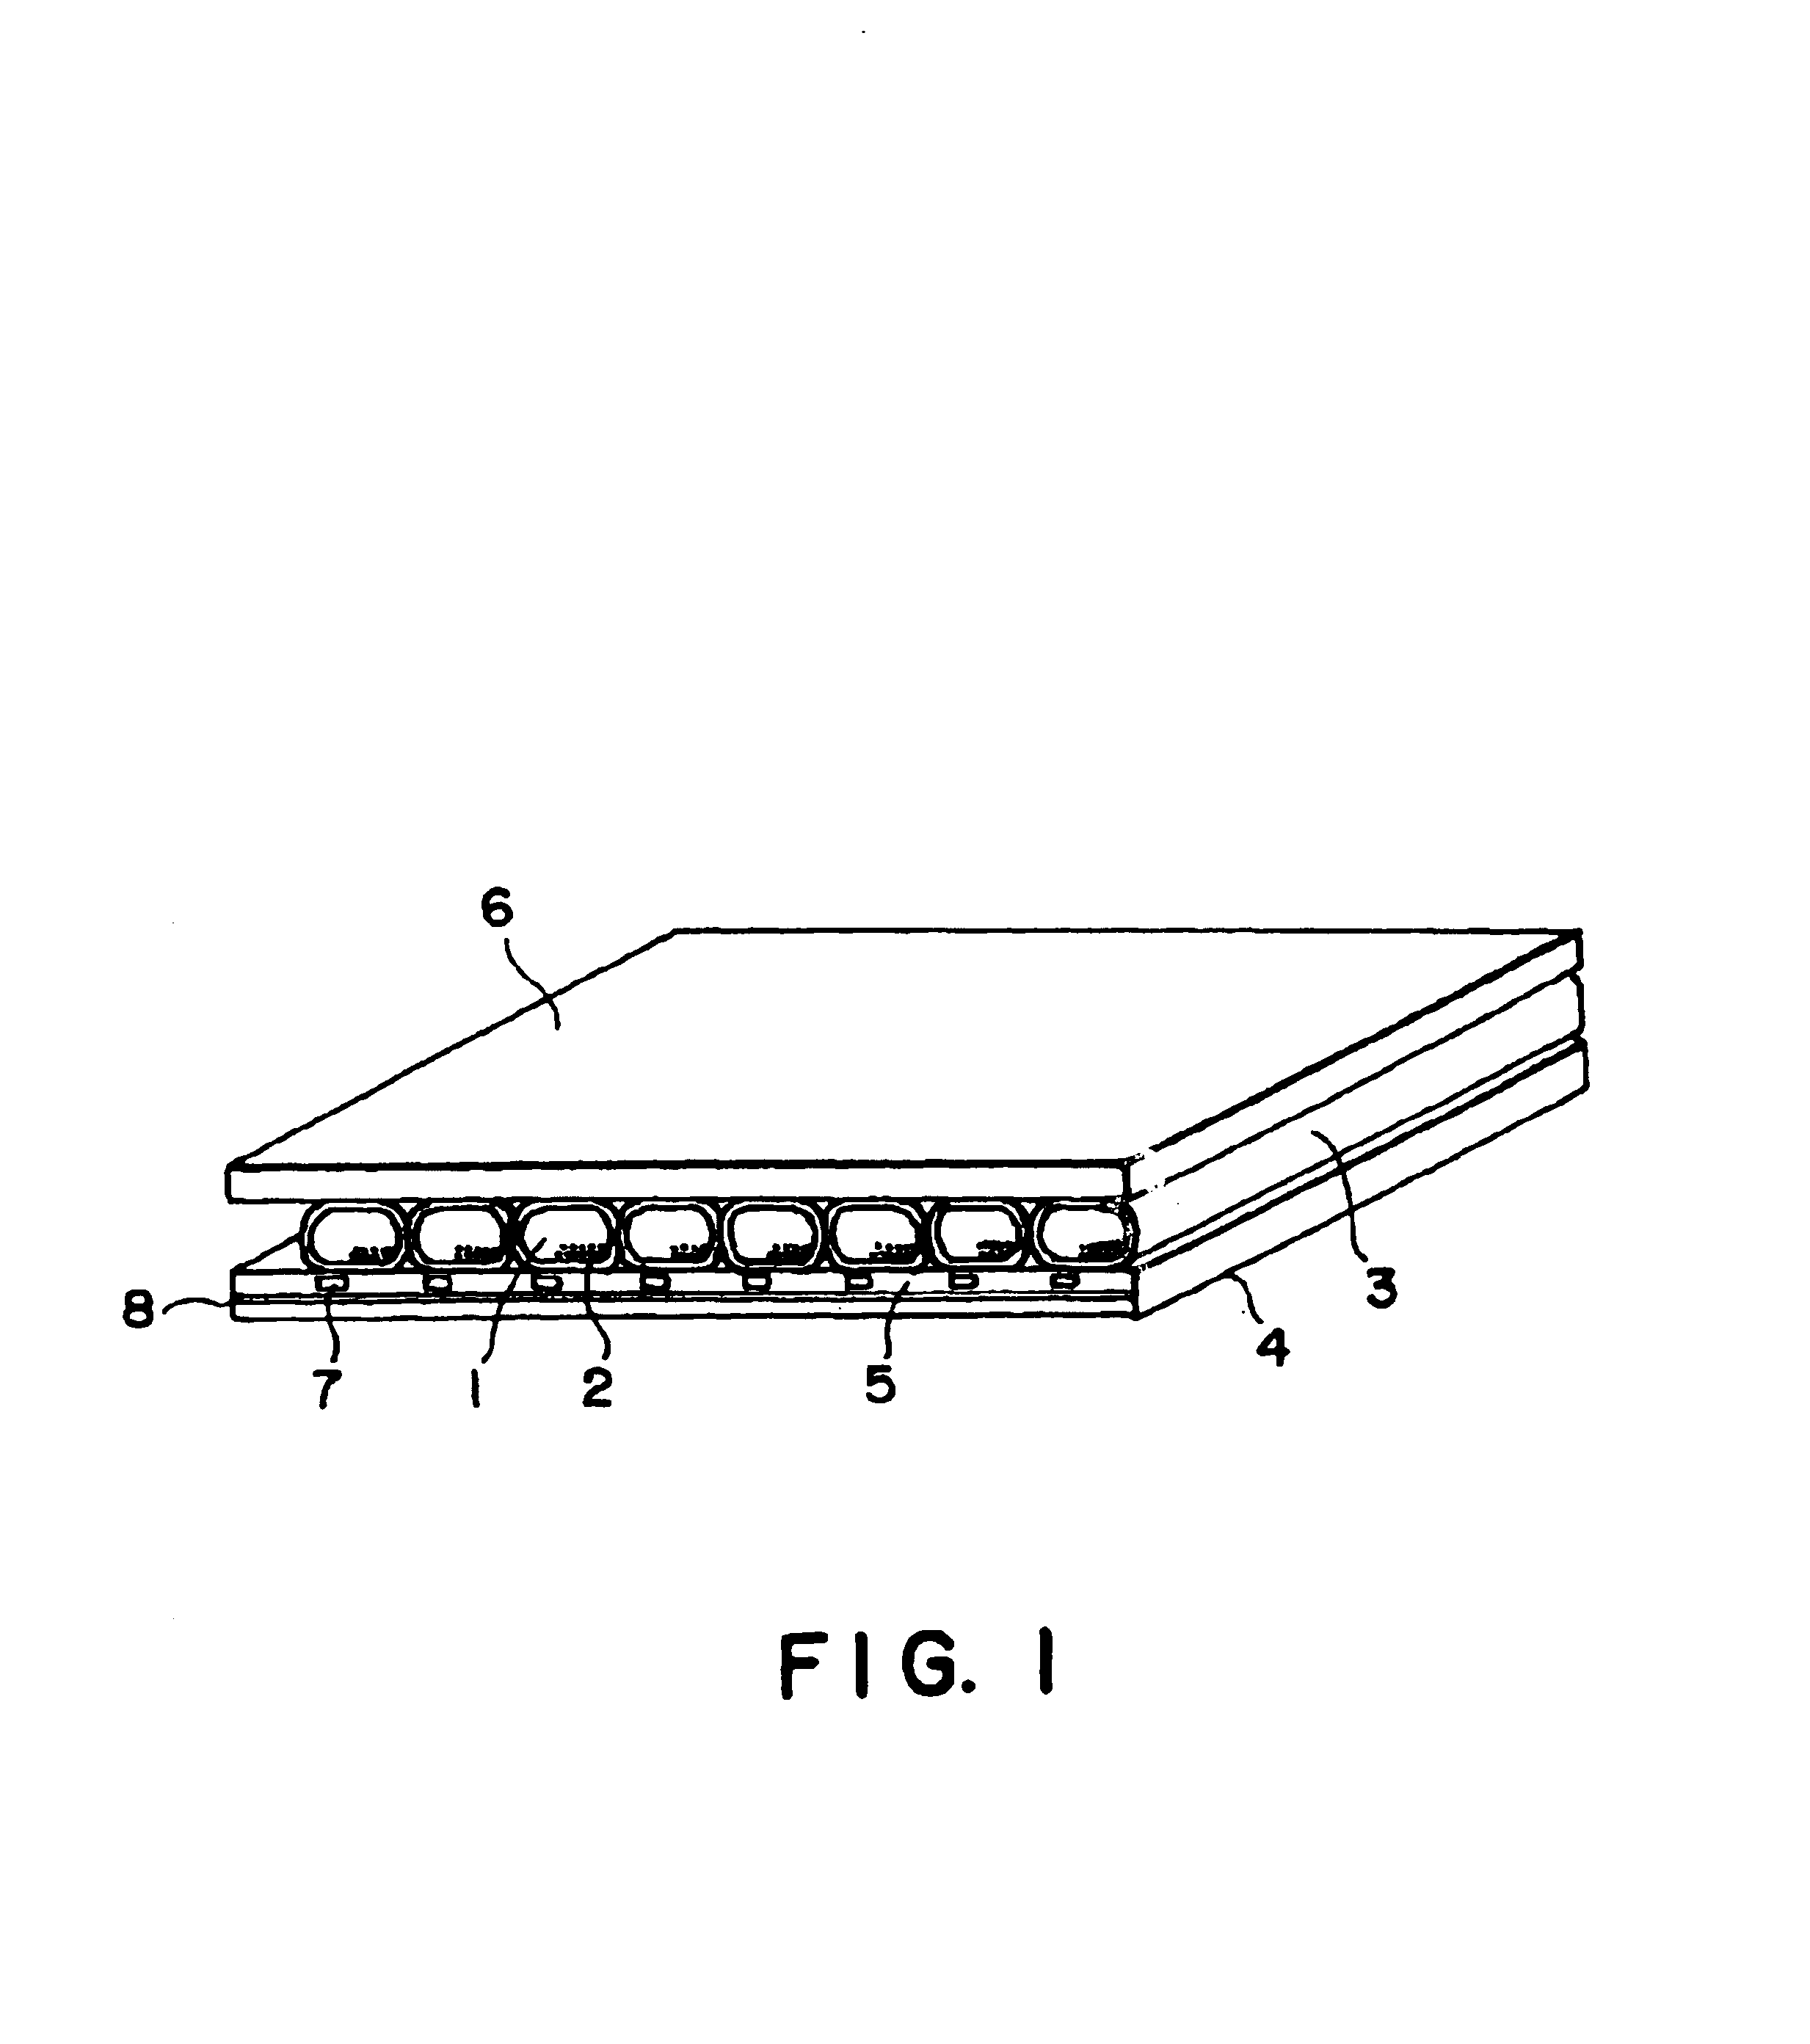 Display device and process for production thereof